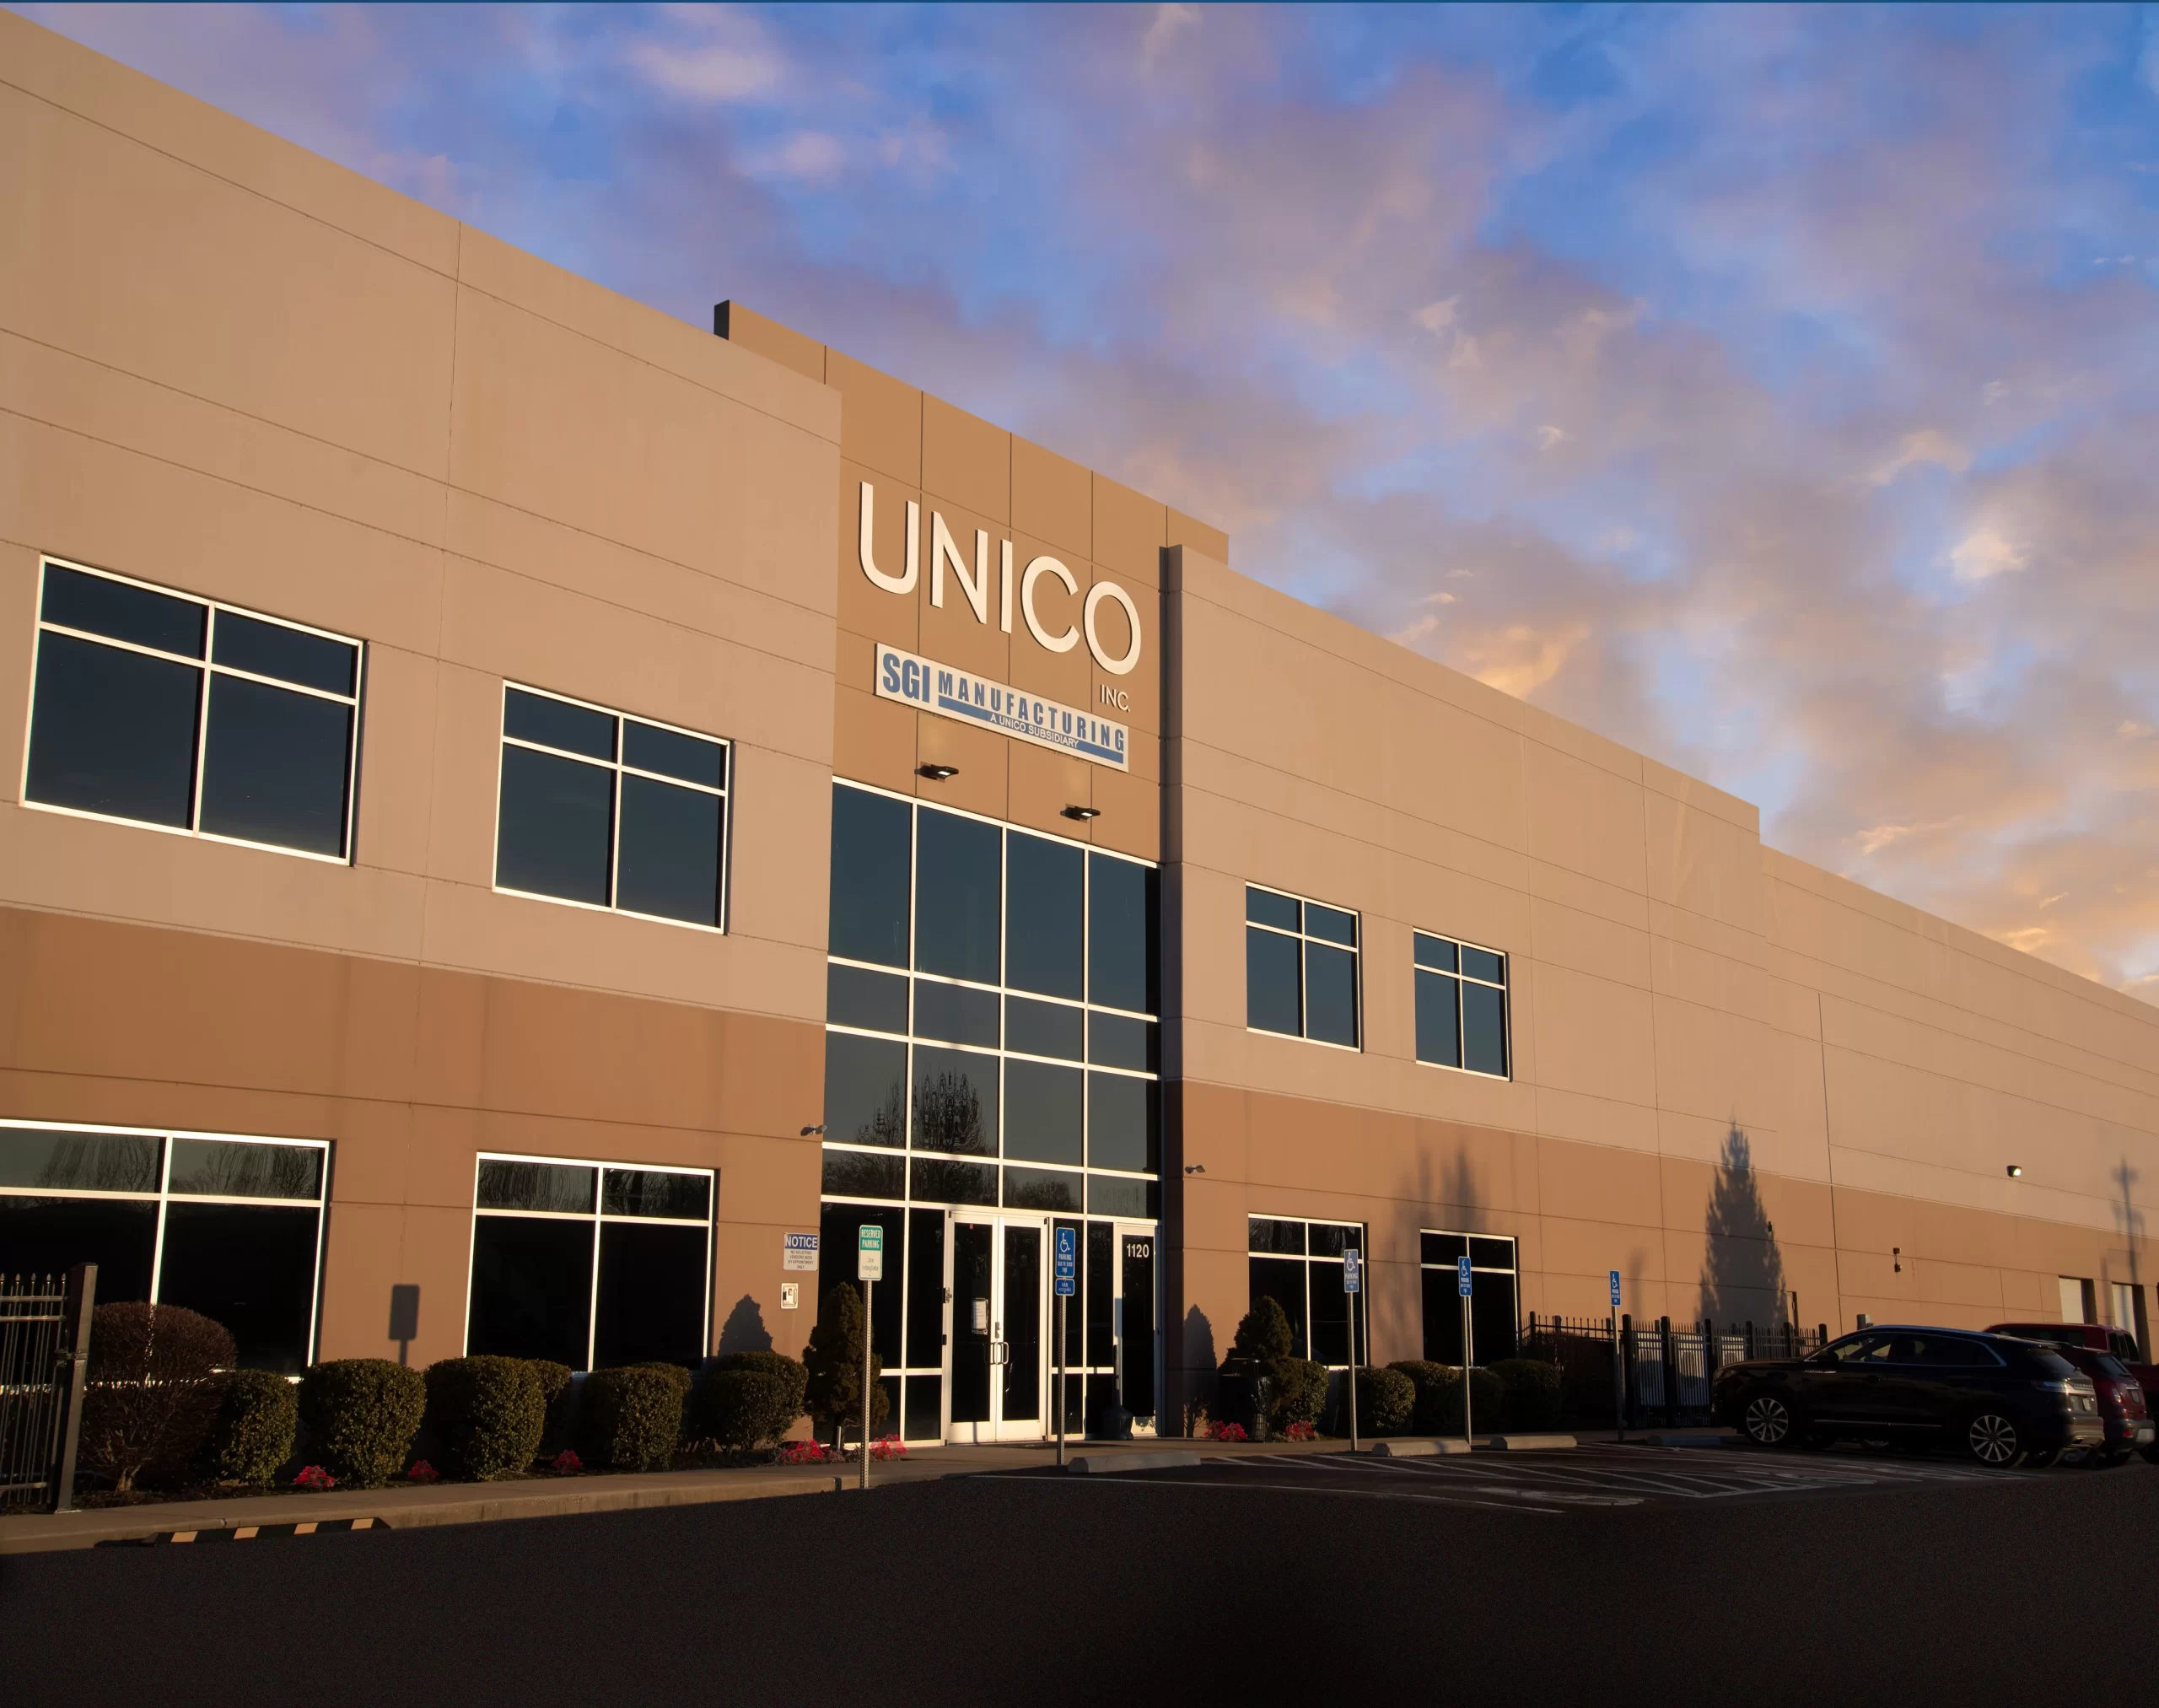 Unico reaches #1 in US with ironSource's full product suite